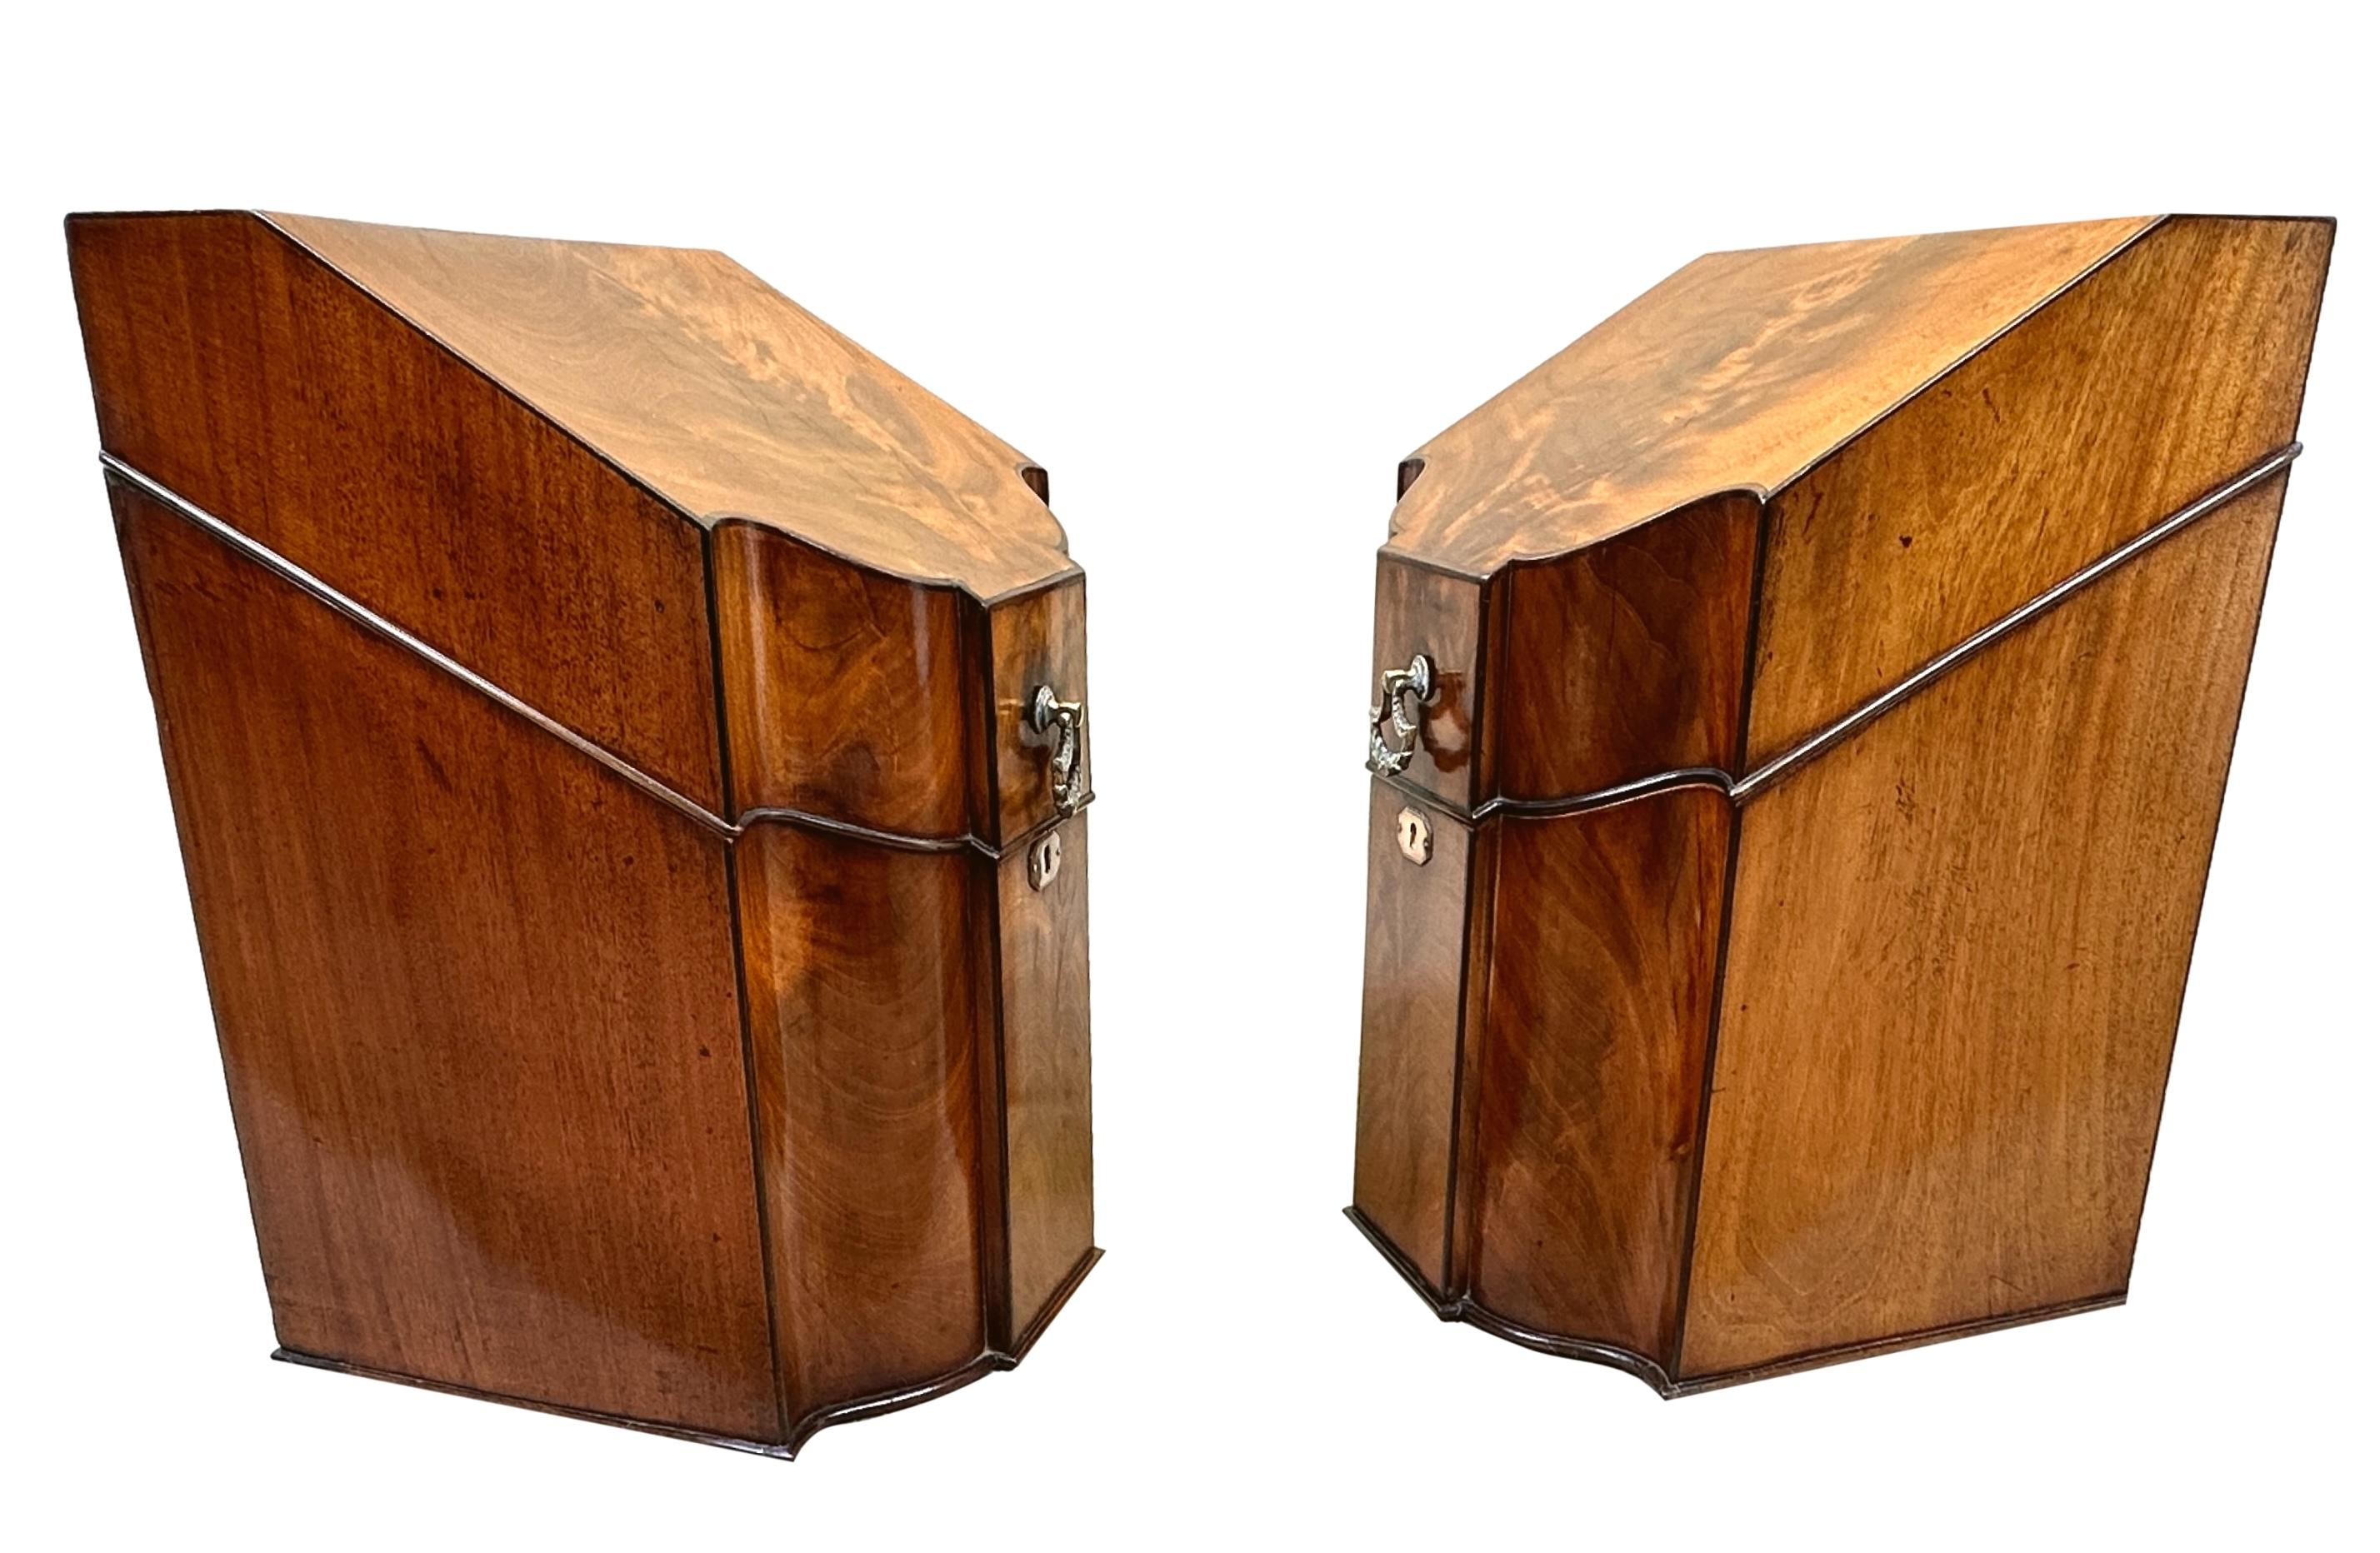 A Delightful Pair Of 18th Century, Hepplewhite Period, Georgian Mahogany Pair Of Knife Boxes, Or Cutlery Boxes, Having Elegant Serpentine Fronts, Superbly Figured Lift Up Lids, Enclosing Fitted Cutlery Decks With Apertures Of Various Shapes And